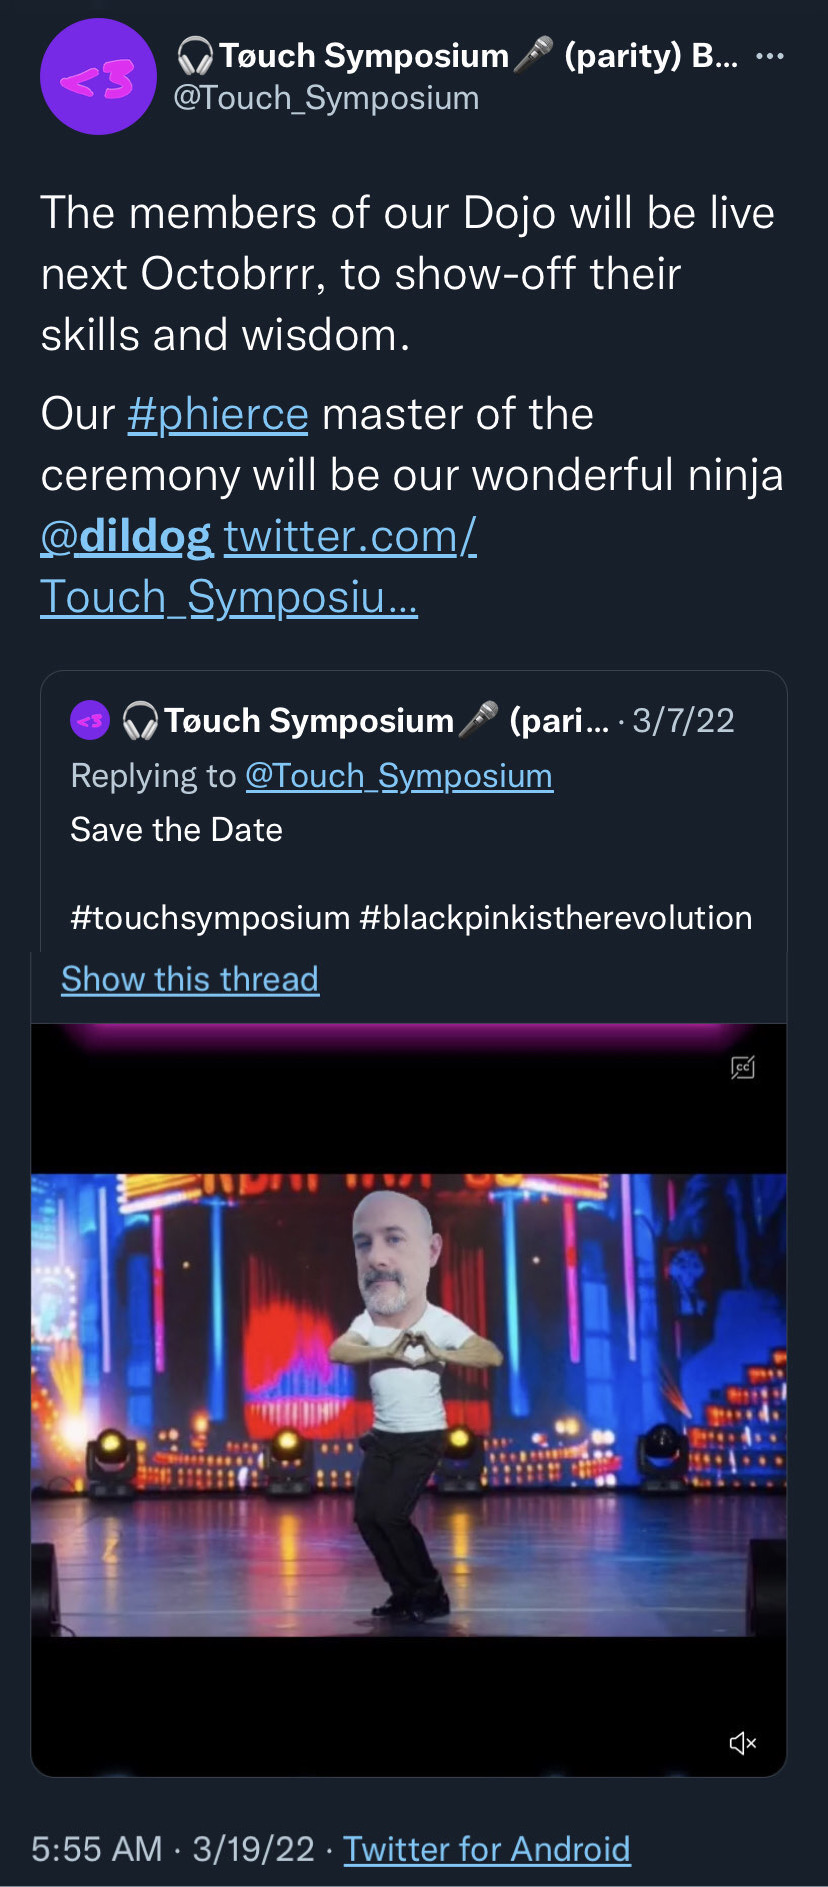 19 Mar 2022 tweet from @Touch_Symposium: 'The members of our Dojo will be live next Octobrrr, to show-off their skills and wisdom. Our #phierce master of the ceremony will be our wonderful ninja @dildog'